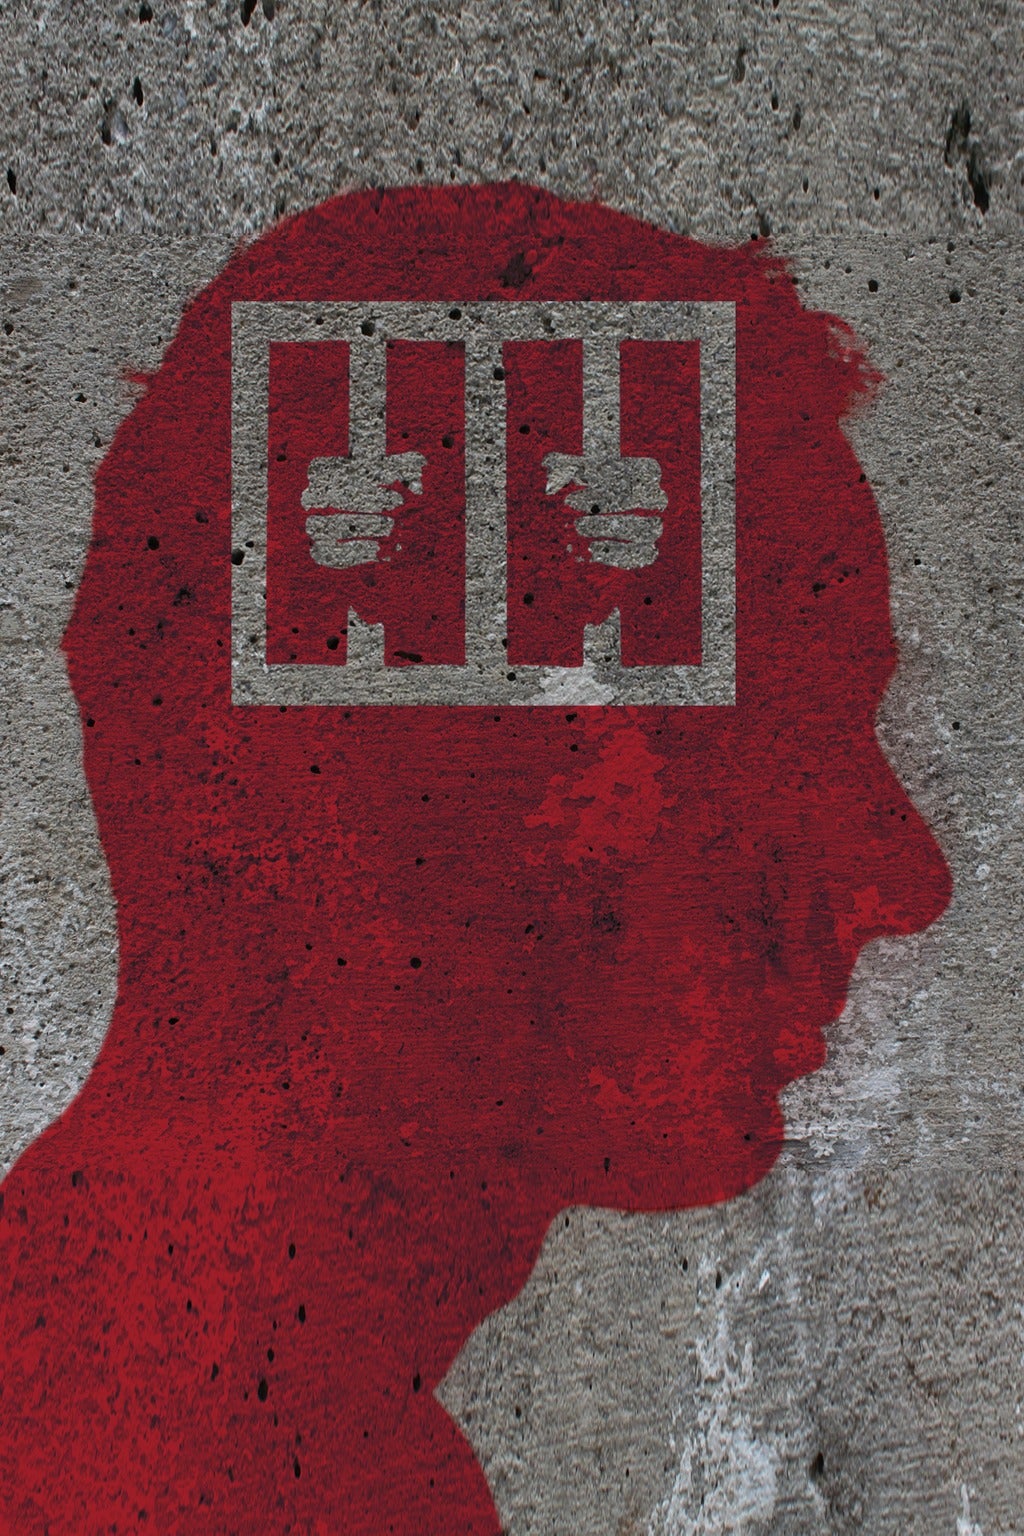 Red silhouette of a man's head with image of hands gripping cell bars